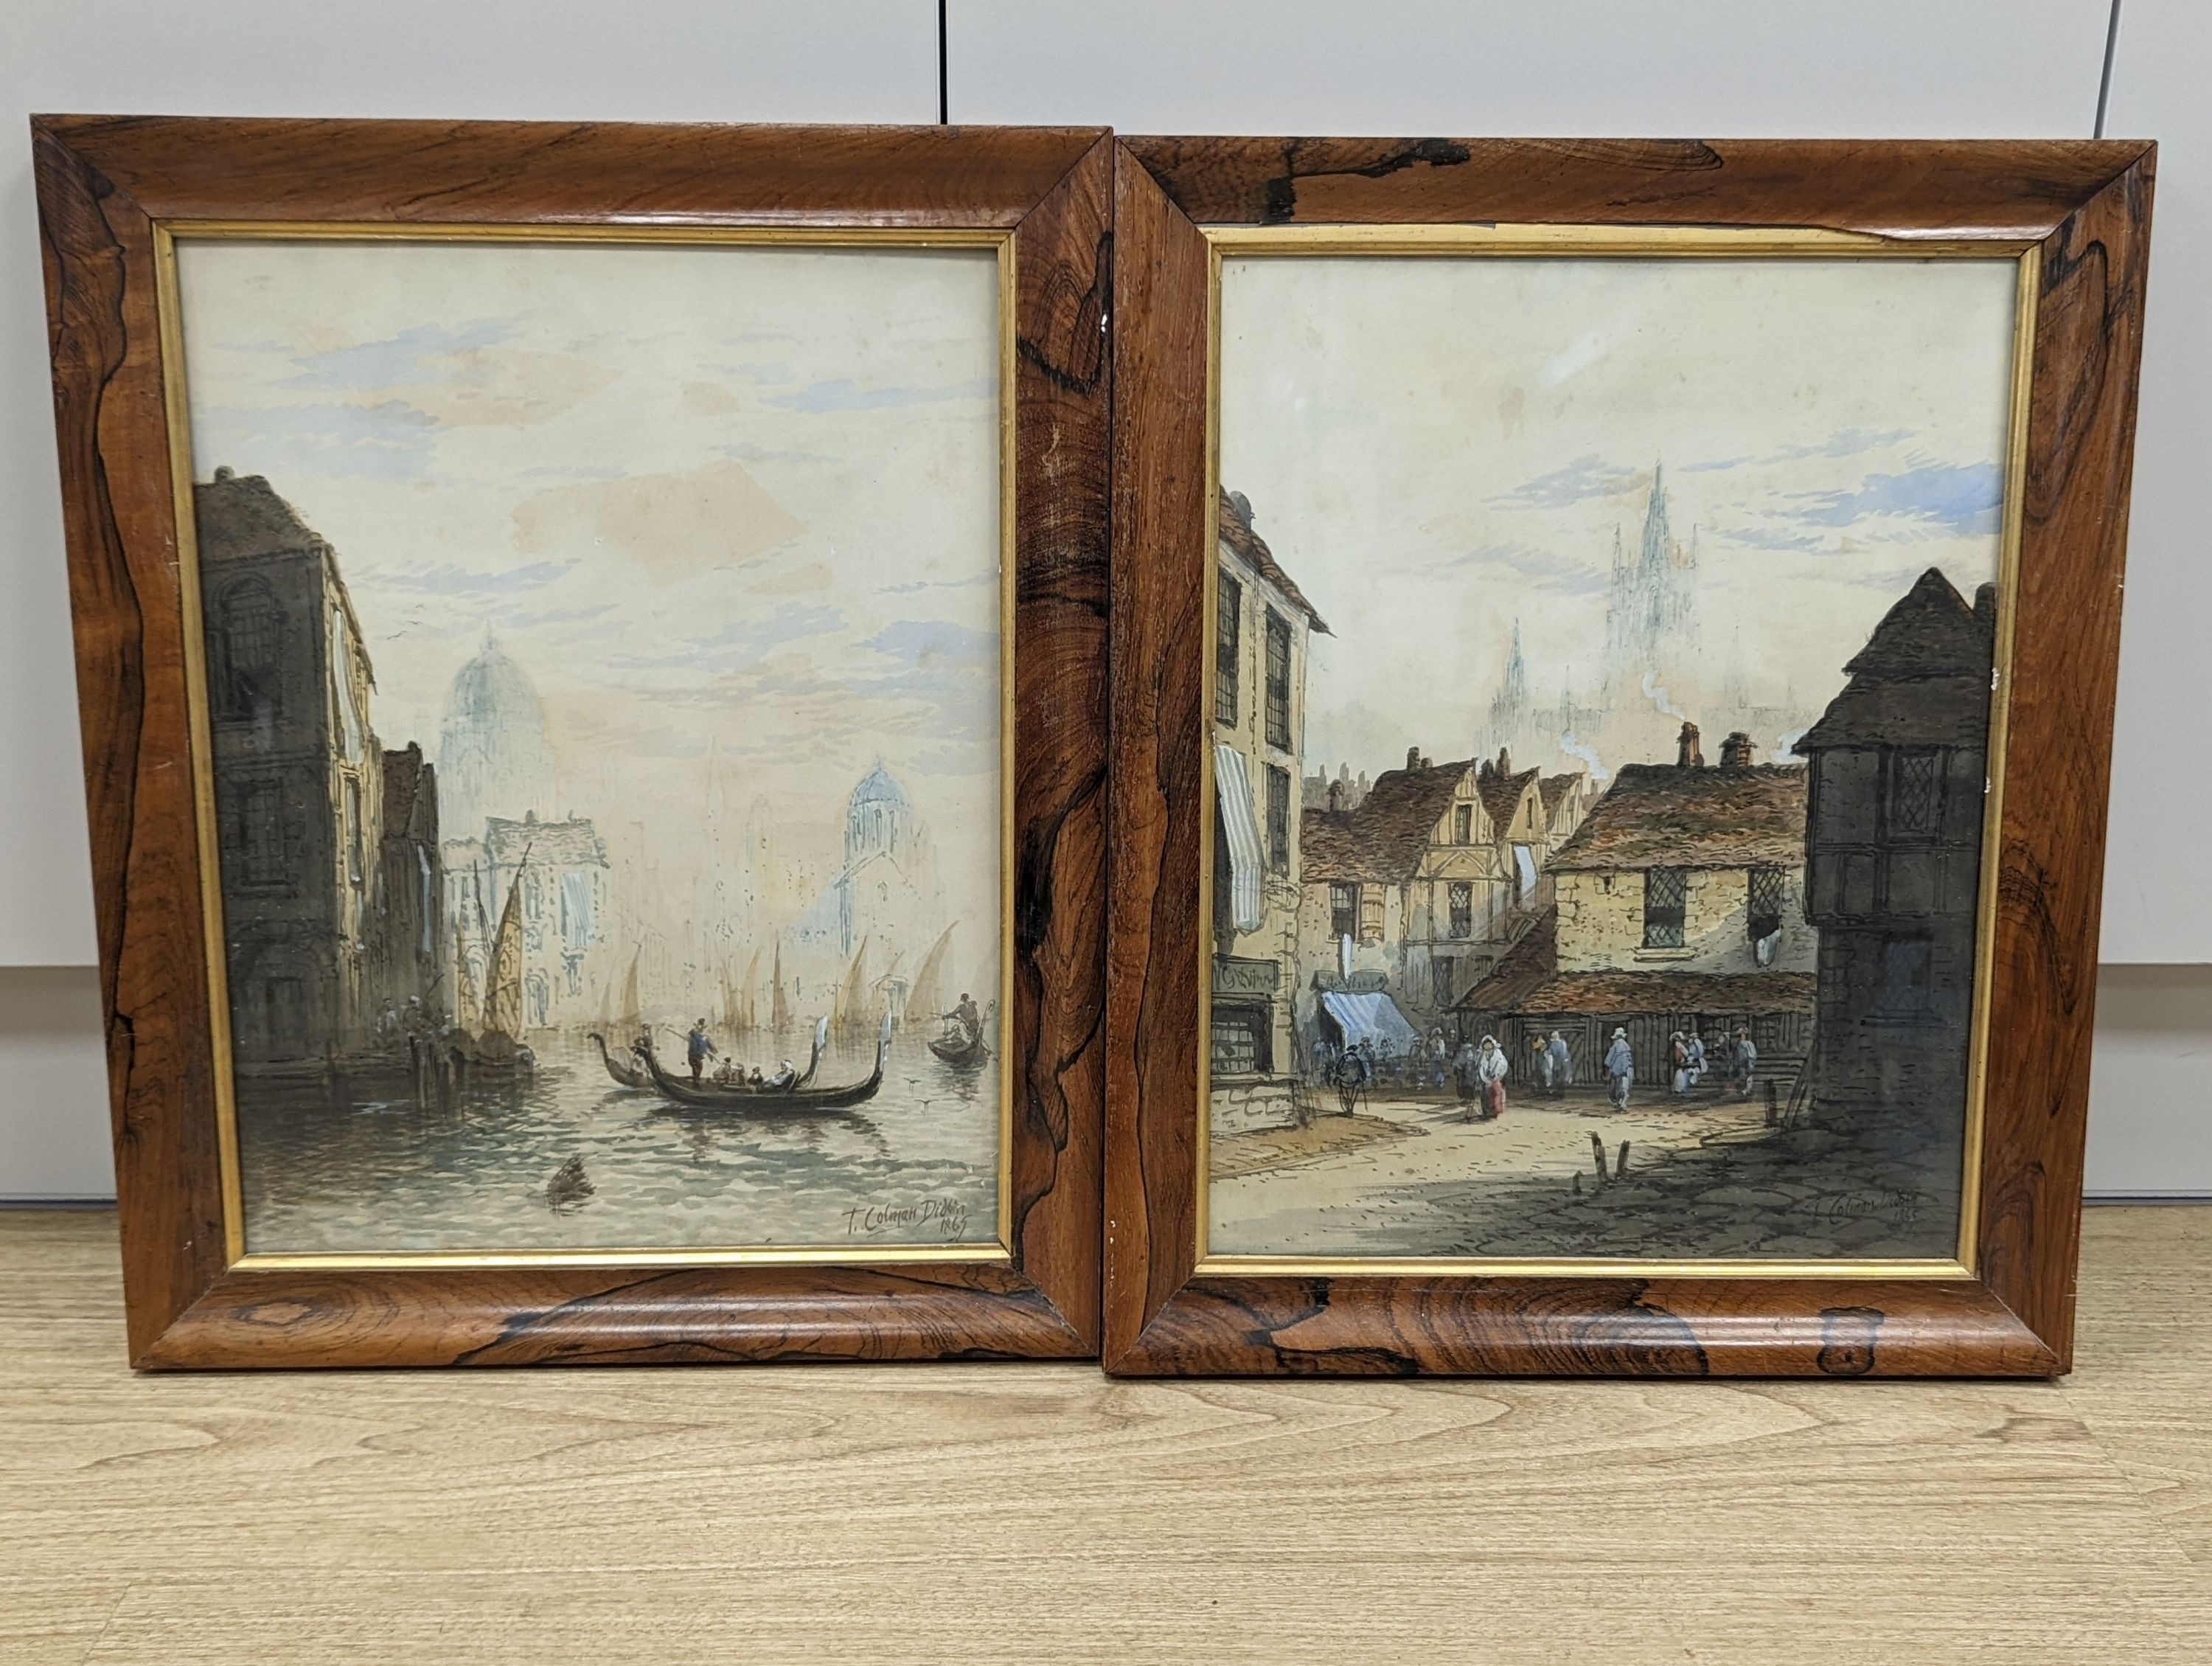 T. Colman Dibdin (1810-1893), pair of watercolours, Venetian canal scene and French street scene, 1865, signed and dated, rosewood frames, 44.5 x 34.5cm